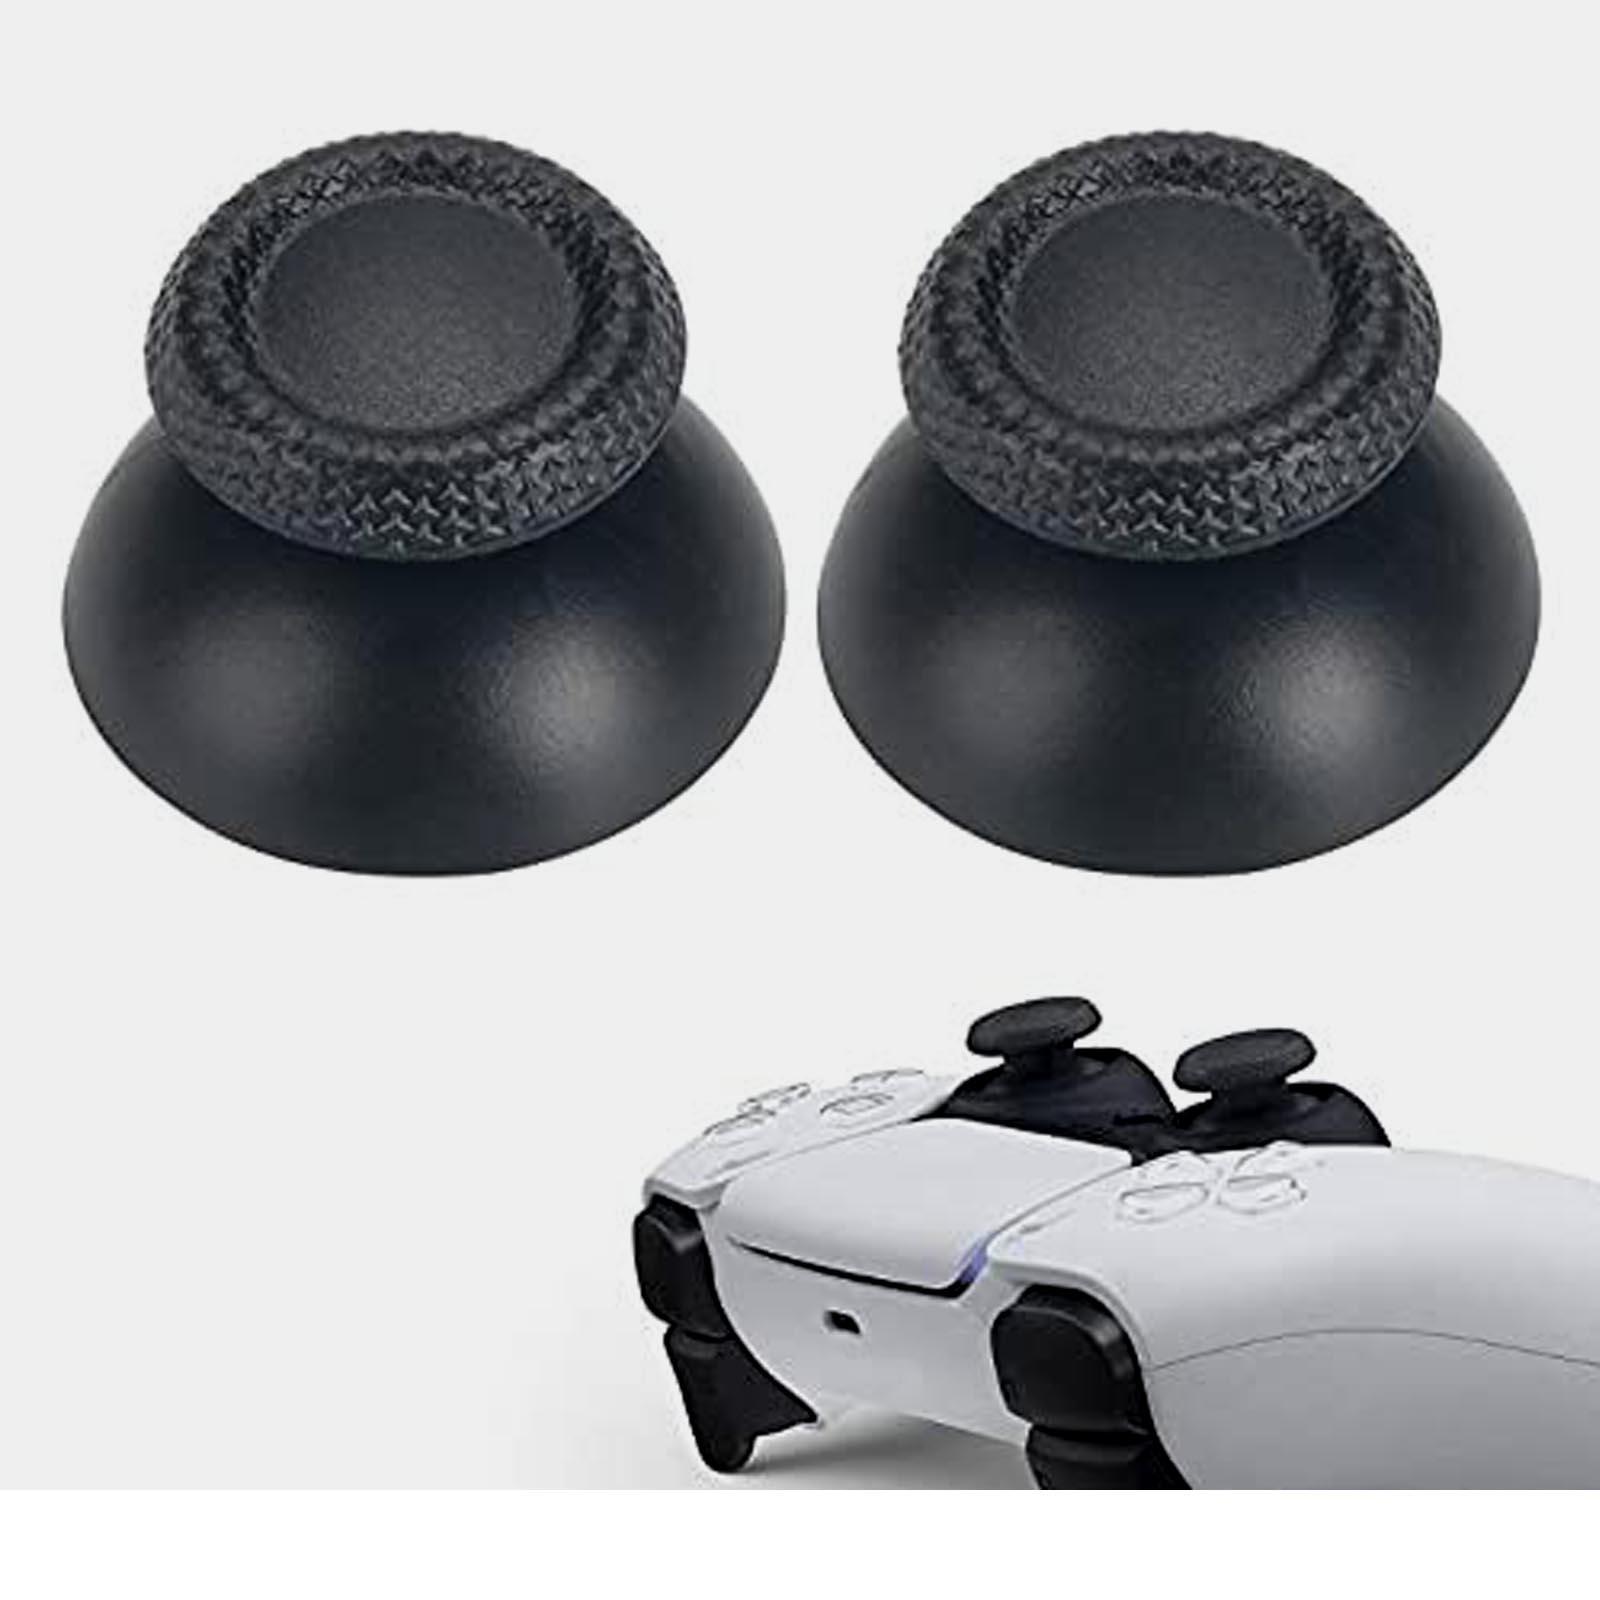 Joystick Caps Analog Caps for PS5 Controllers